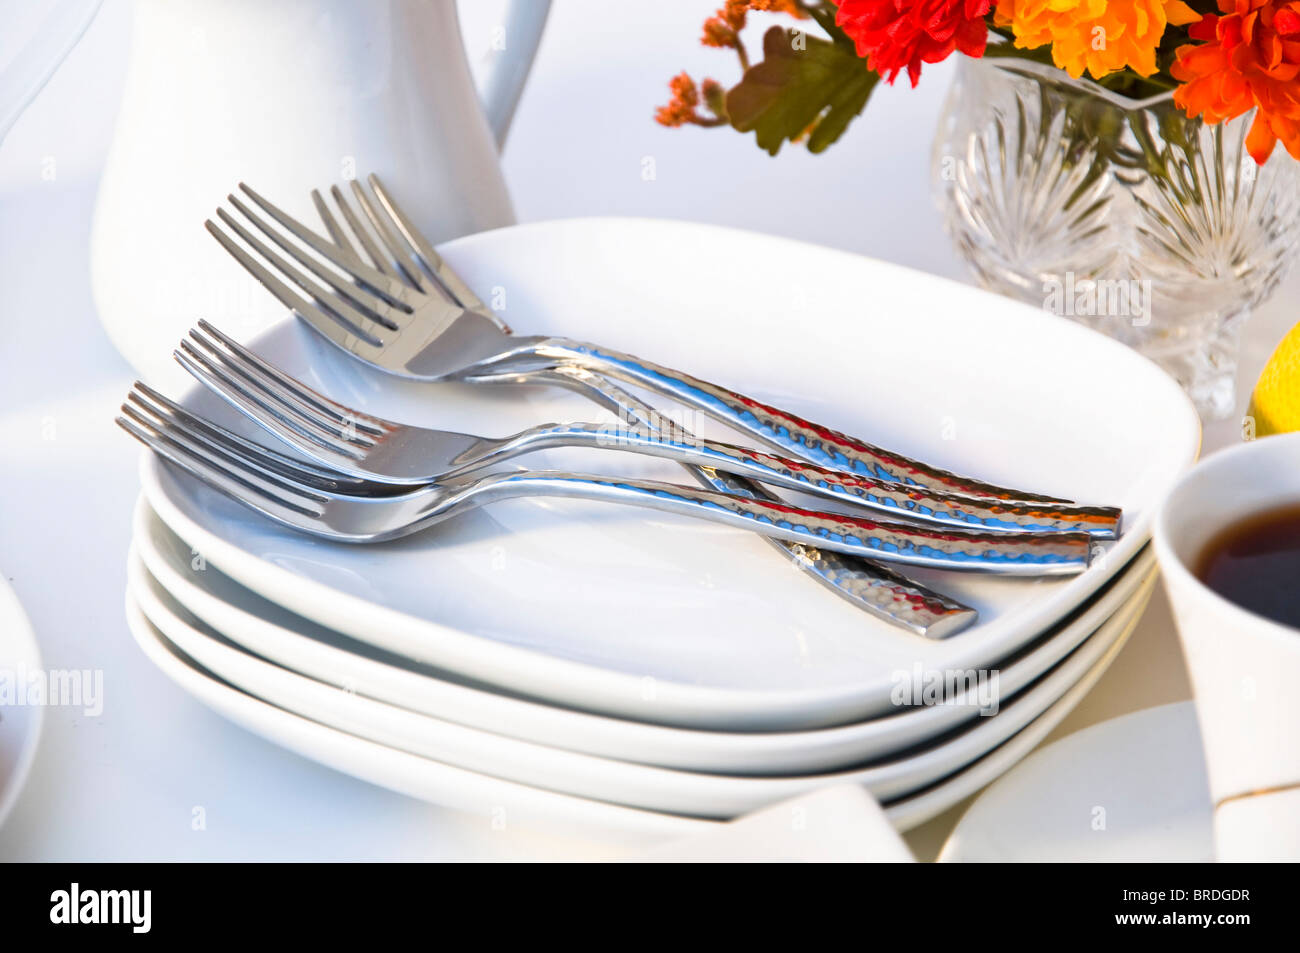 Plates and forks Stock Photo